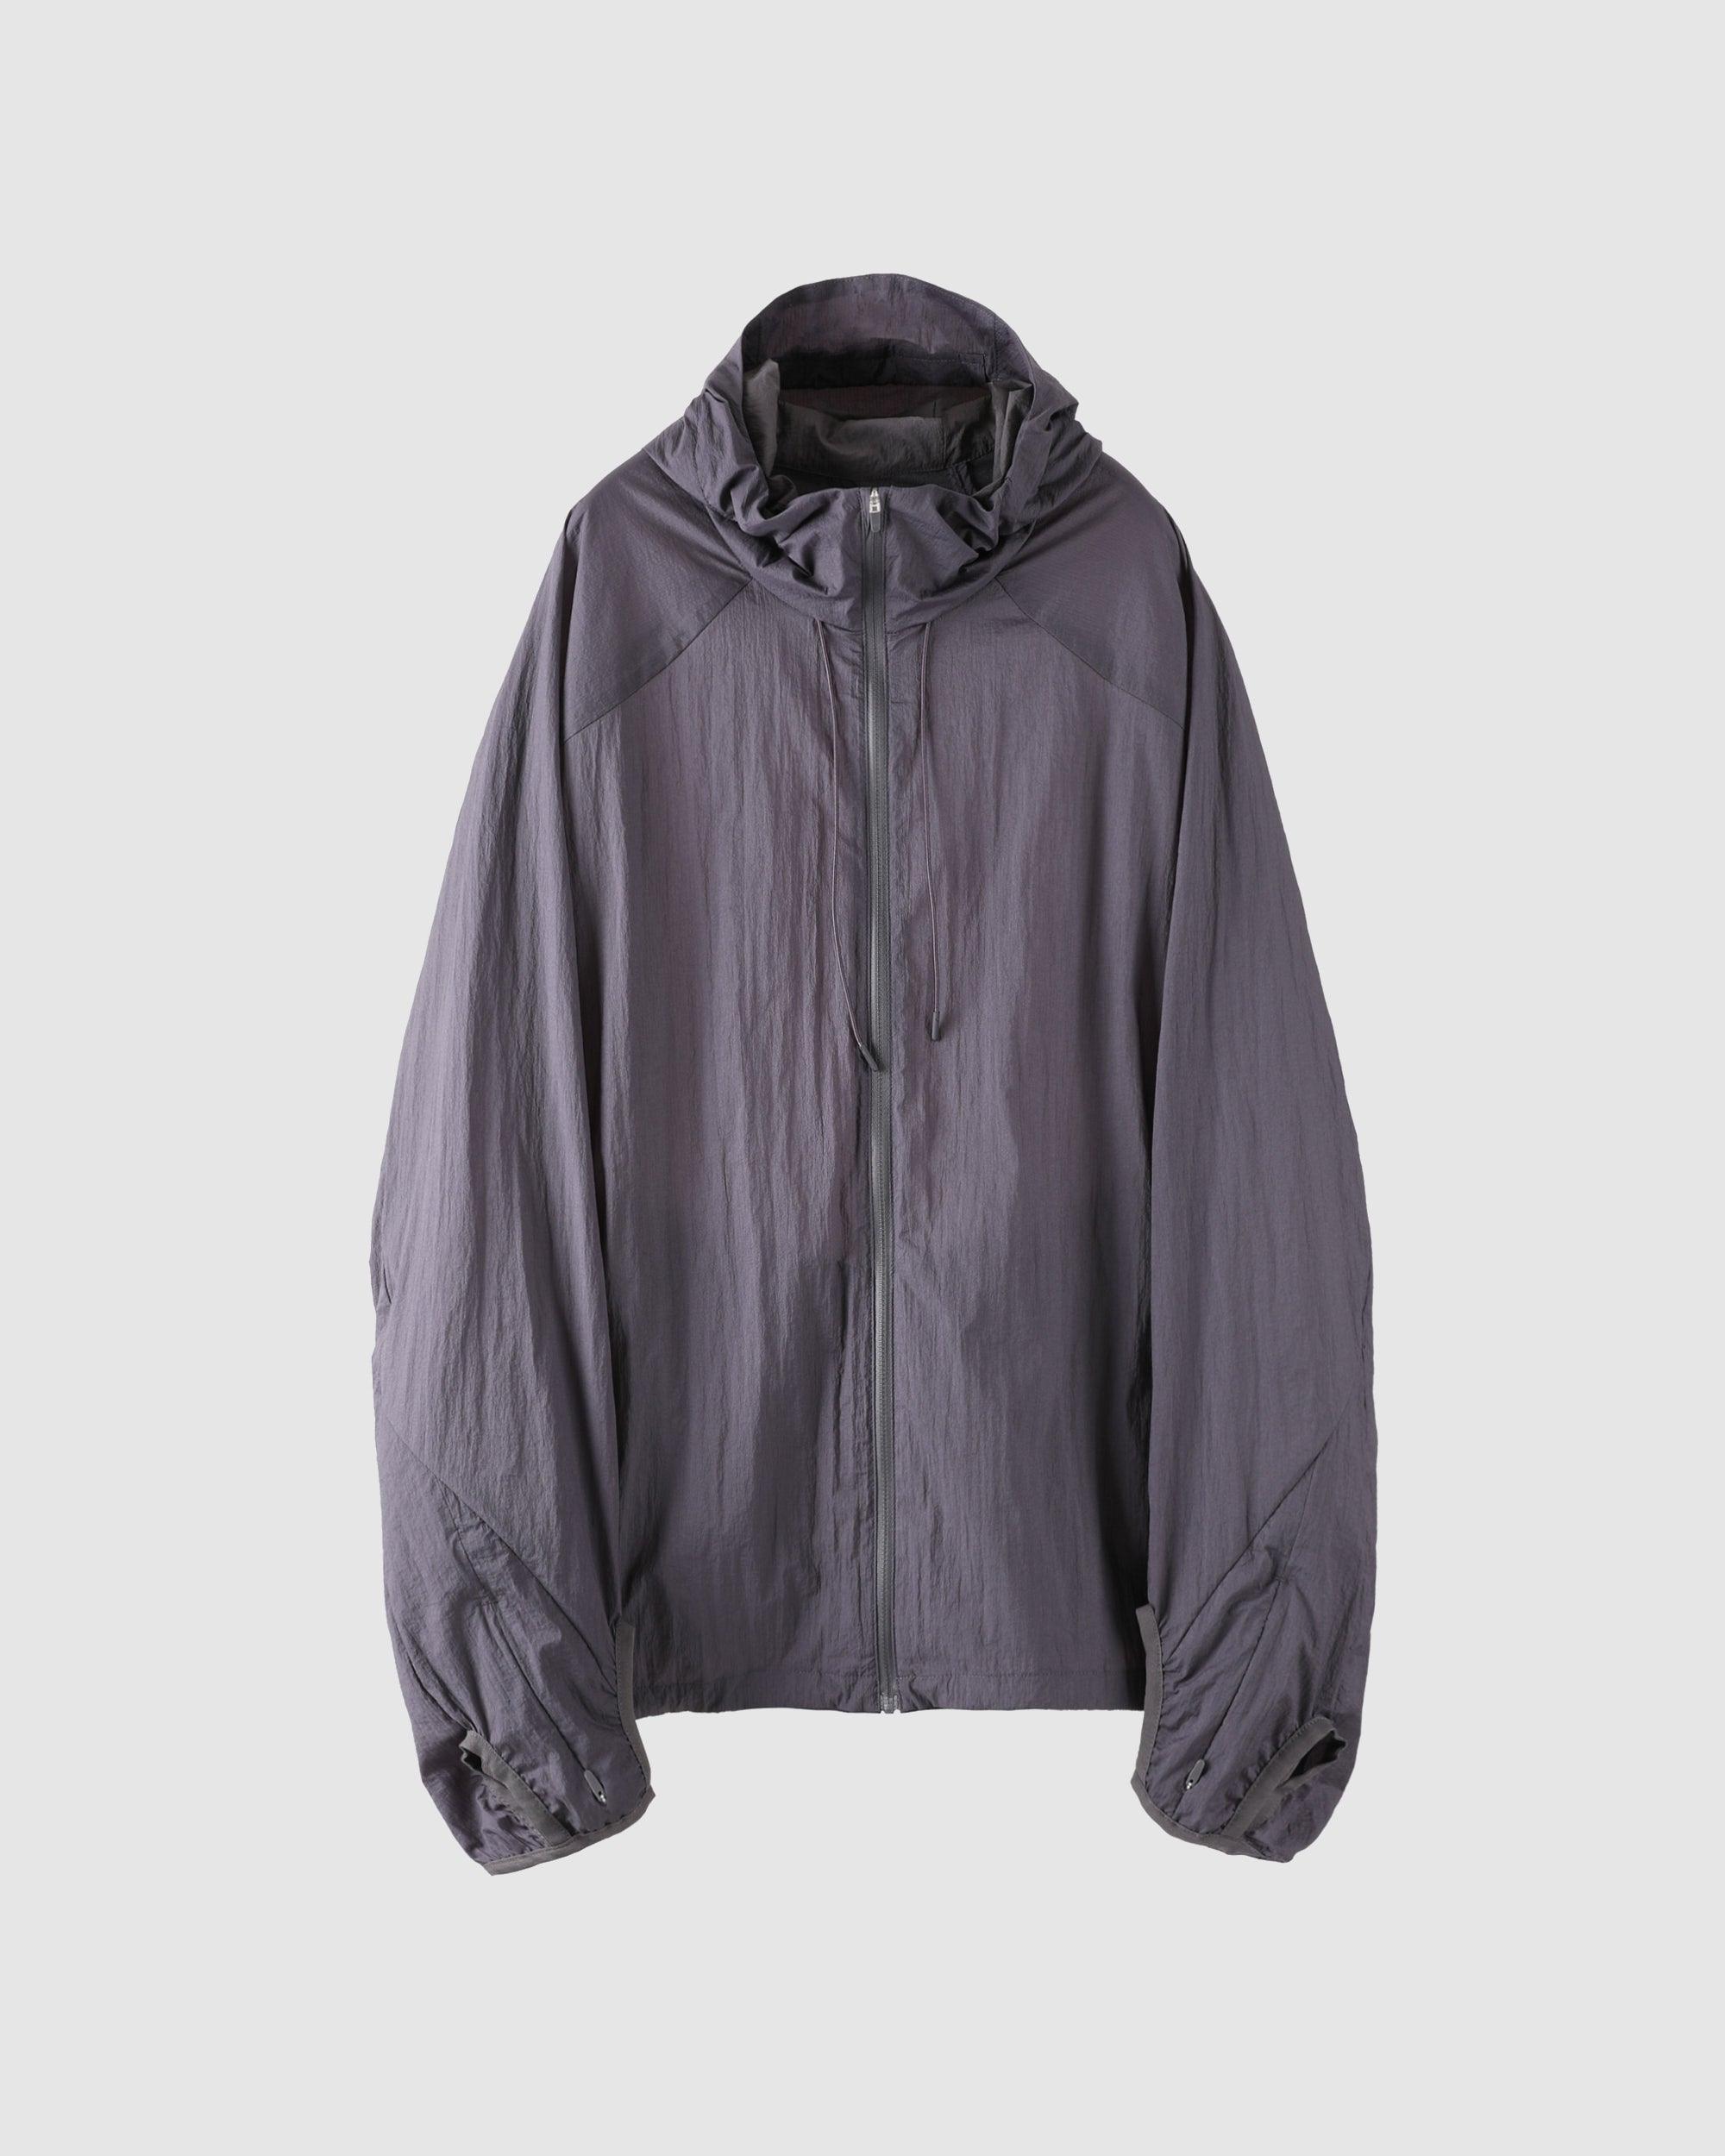 POST ARCHIVE FACTION (PAF) 5.1 Technical Jacket Right Purple 